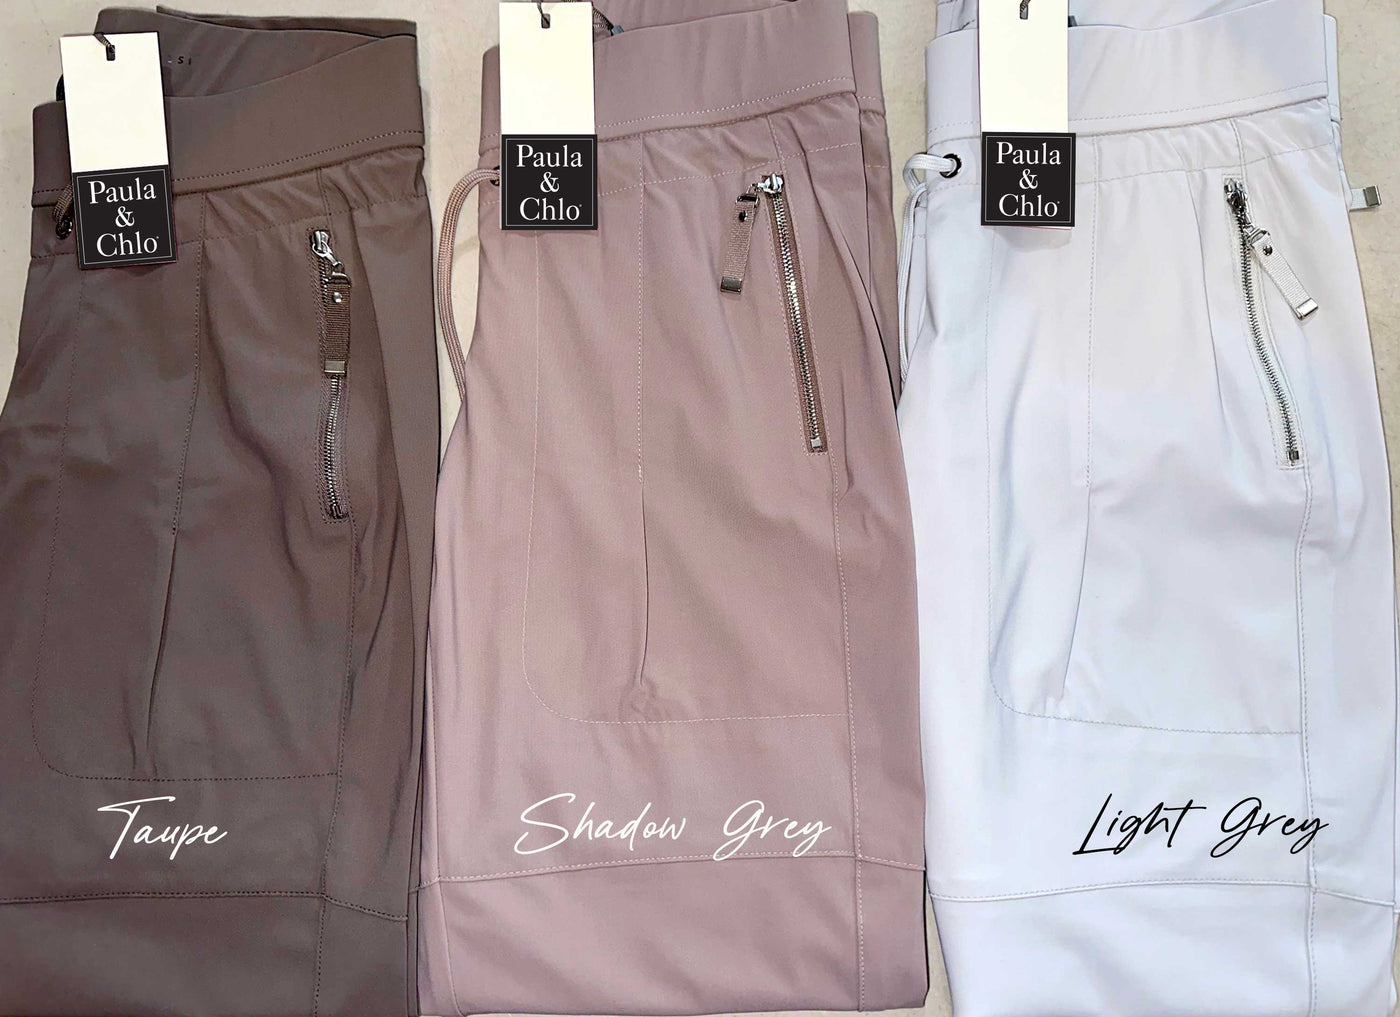 Candy Pant comparison Taupe, Shadow Grey and Light Grey - Raffaello Rossi available at Paulaandchlo.com